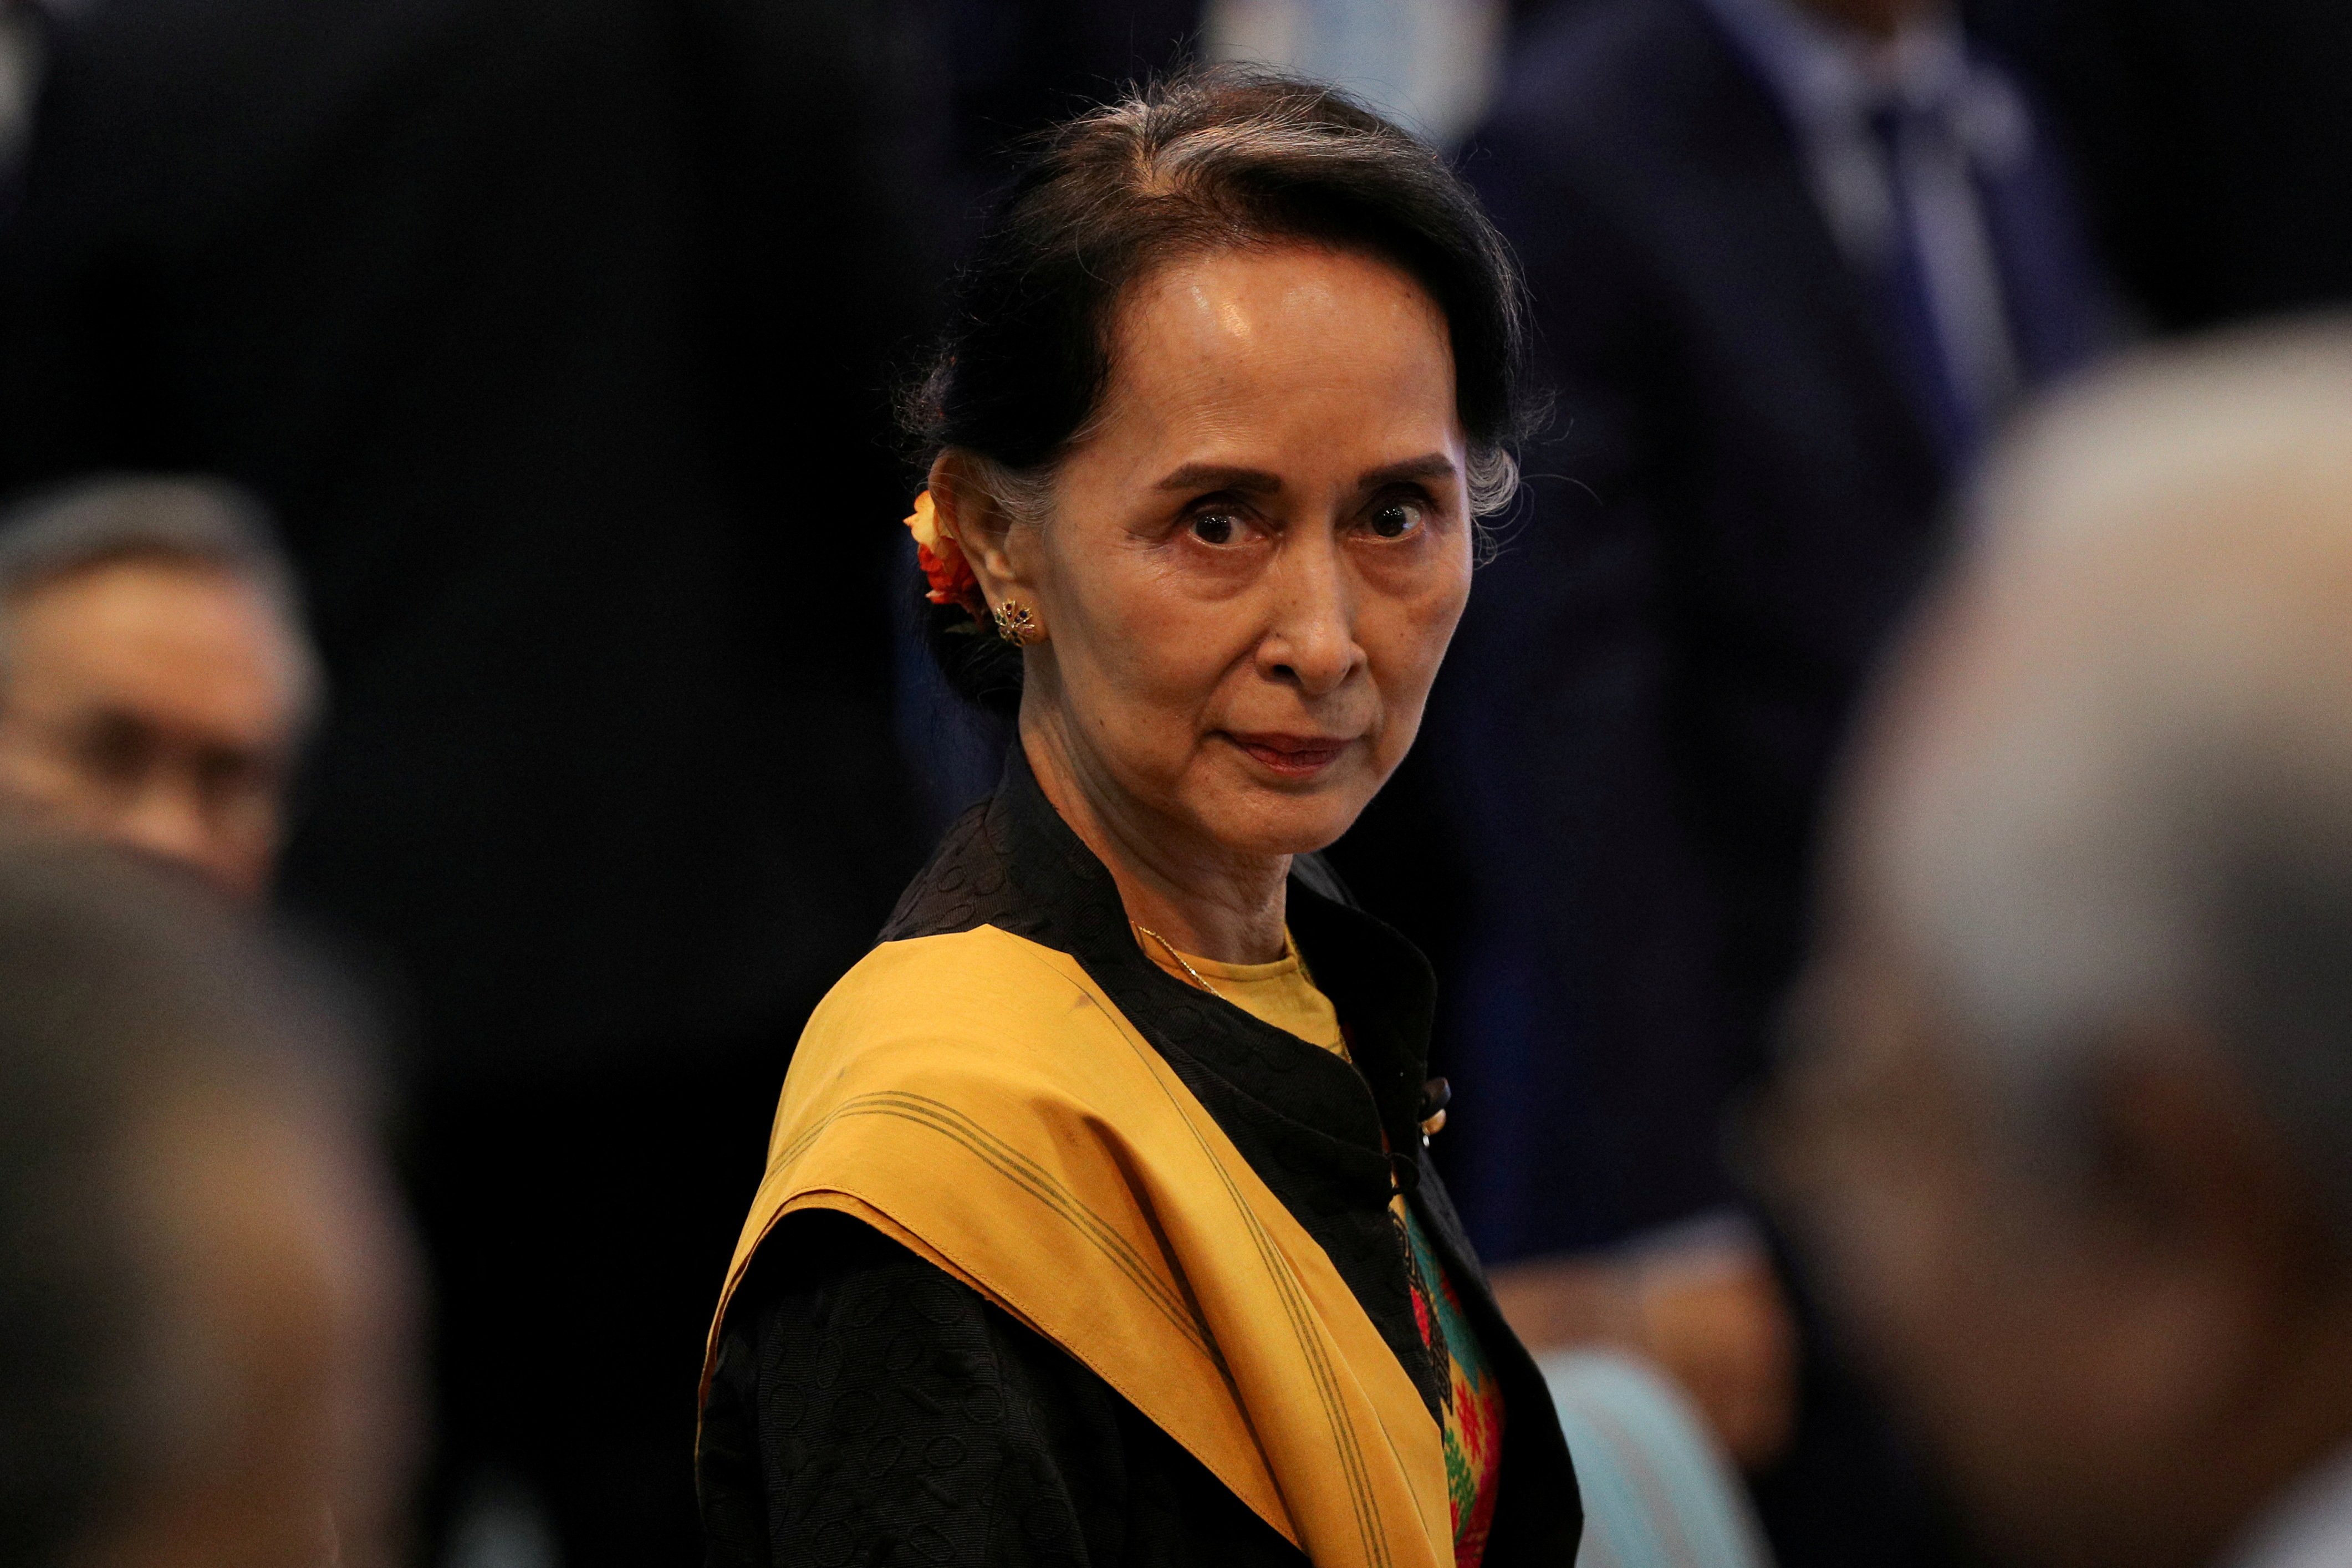 FILE PHOTO: Myanmar State Counselor Suu Kyi attends the opening session of the 31st ASEAN Summit in Manila